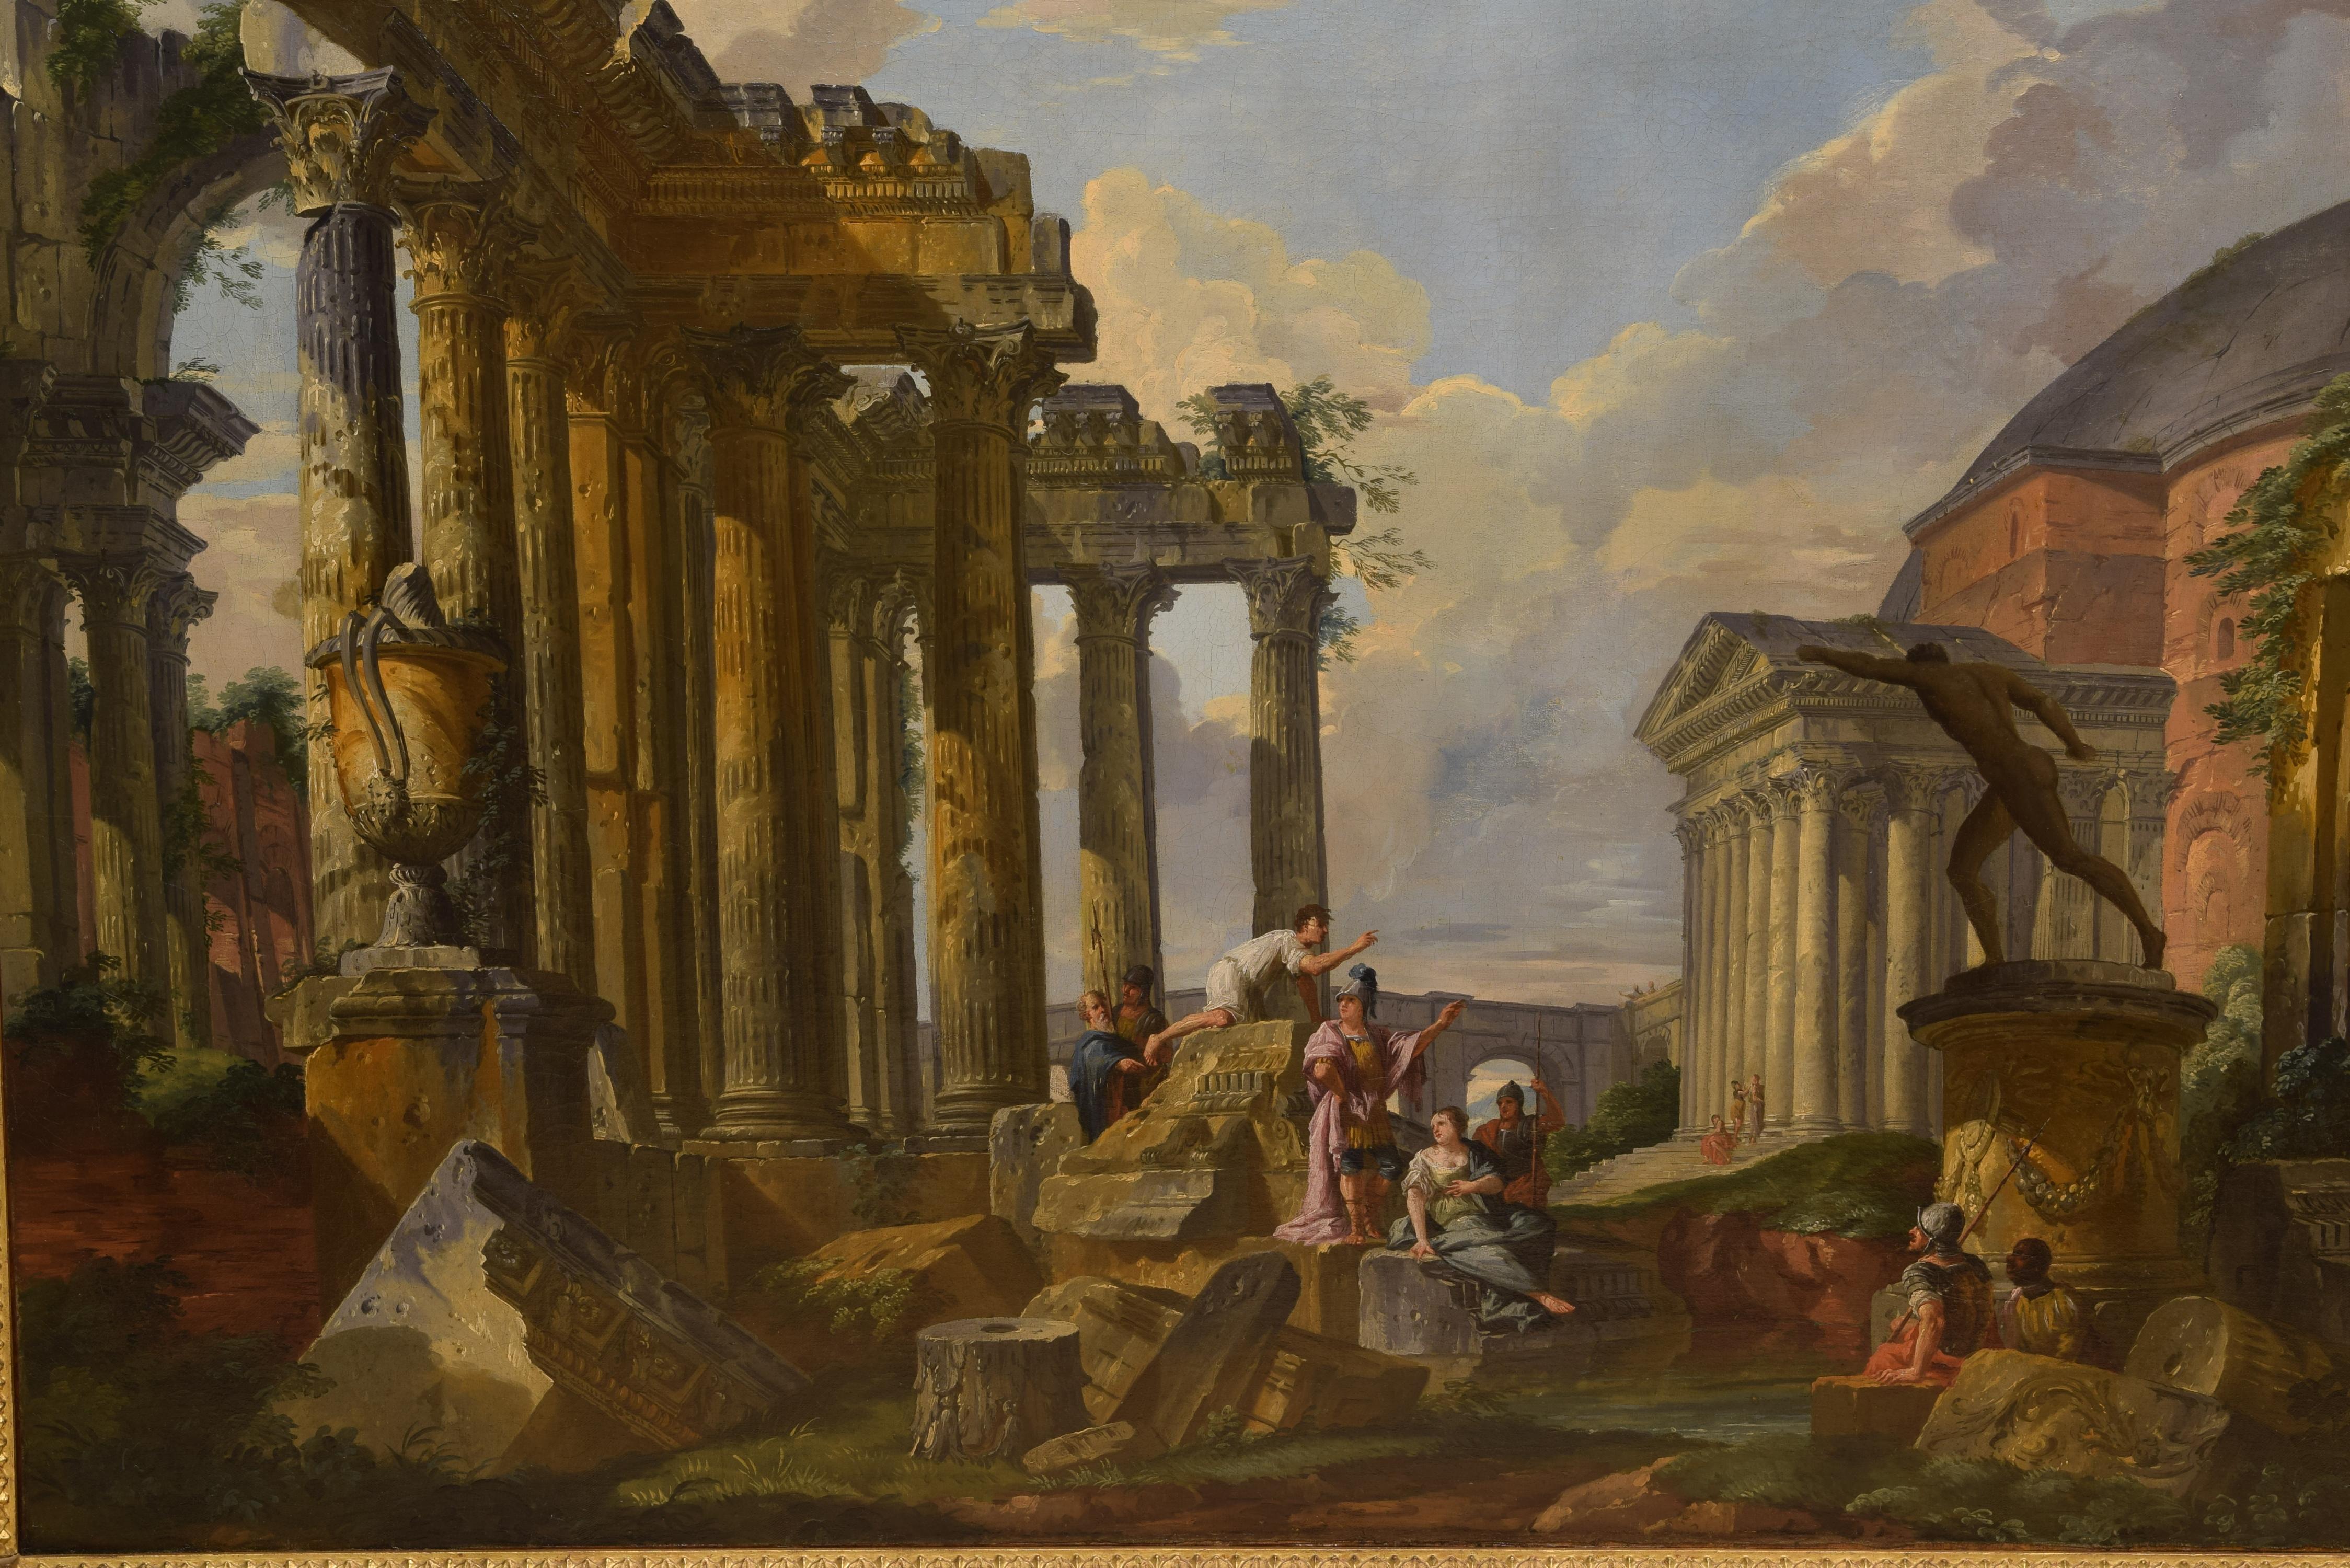 Capriccio. Possibly circle of Panini, Giovanni Paolo (Italy, 1691-1765).
A series of classical ruins of Ancient Rome (or inspired by it) have been harmoniously located under a blue sky with clouds. The columns and entablatures on the left (with